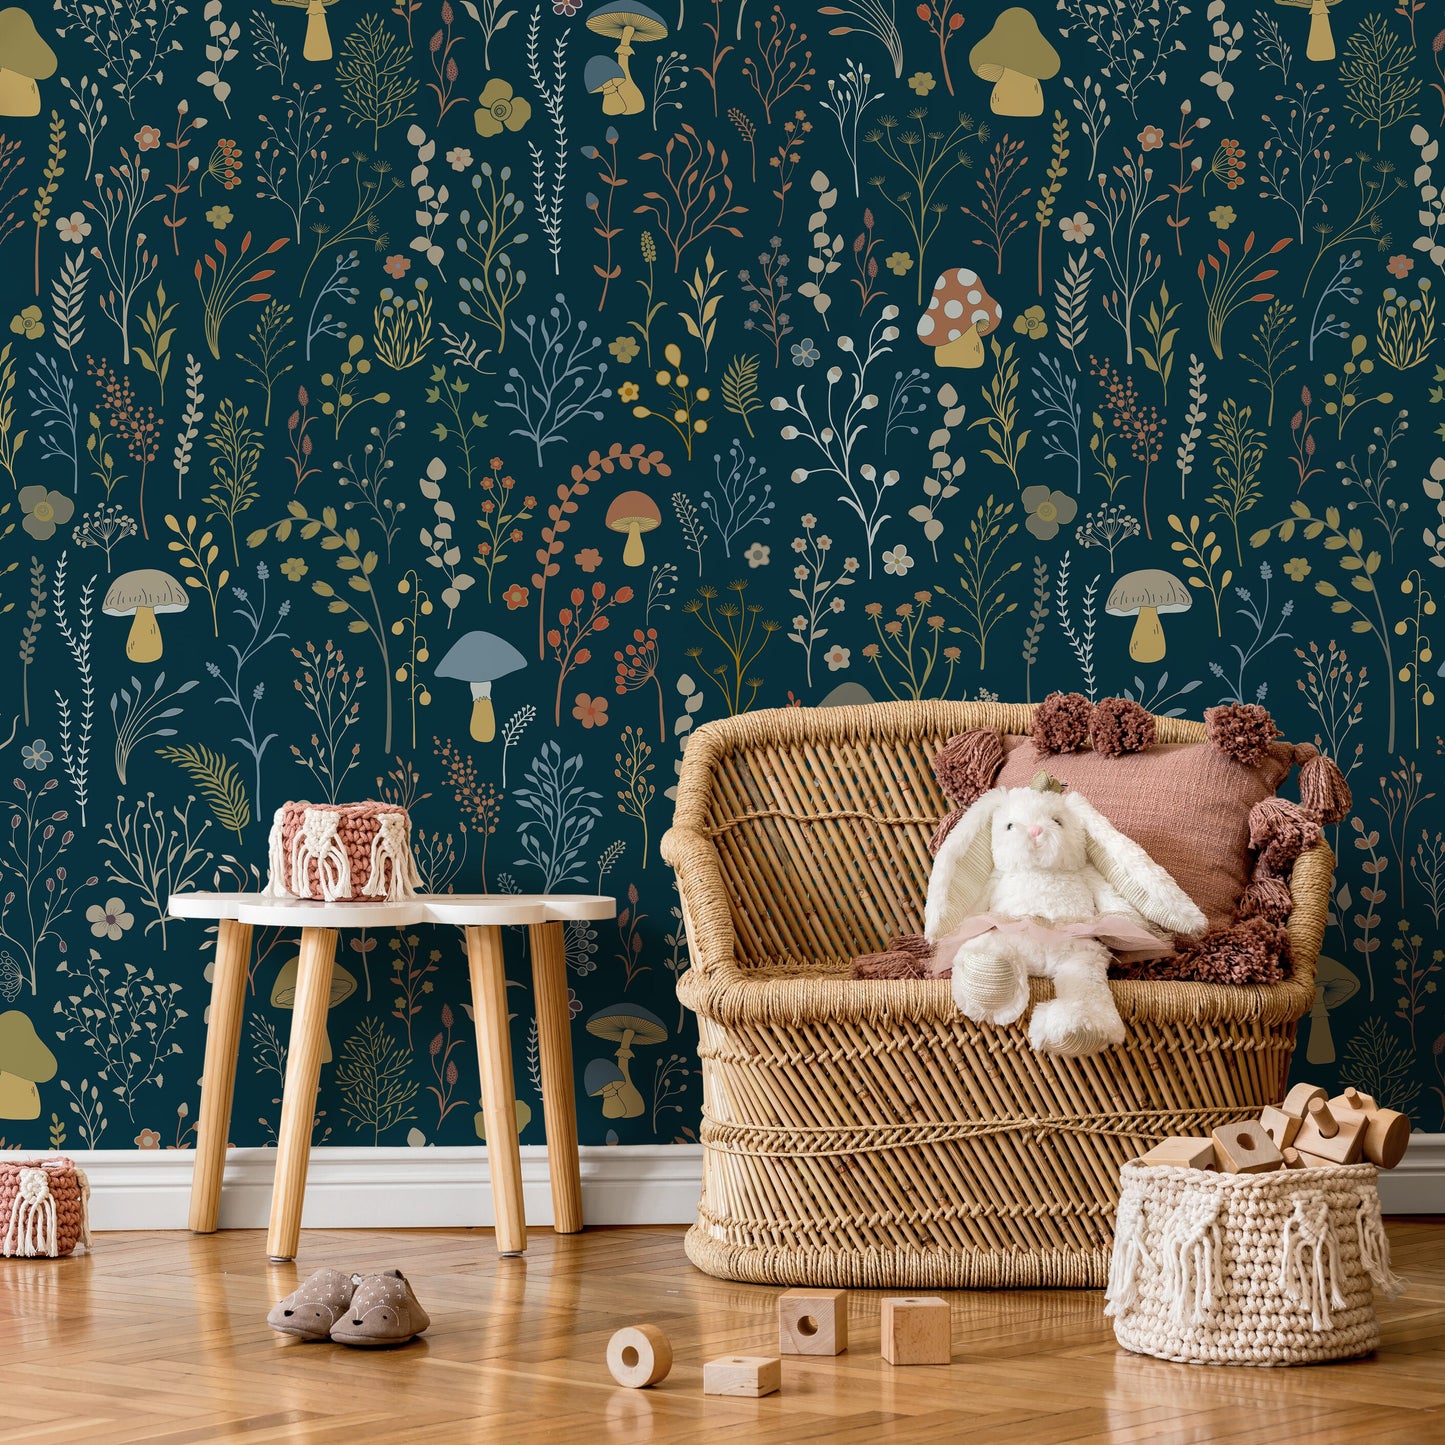 Dark Floral Wallpaper Leaf and Mushroom Wallpaper Peel and Stick and Traditional Wallpaper - D911